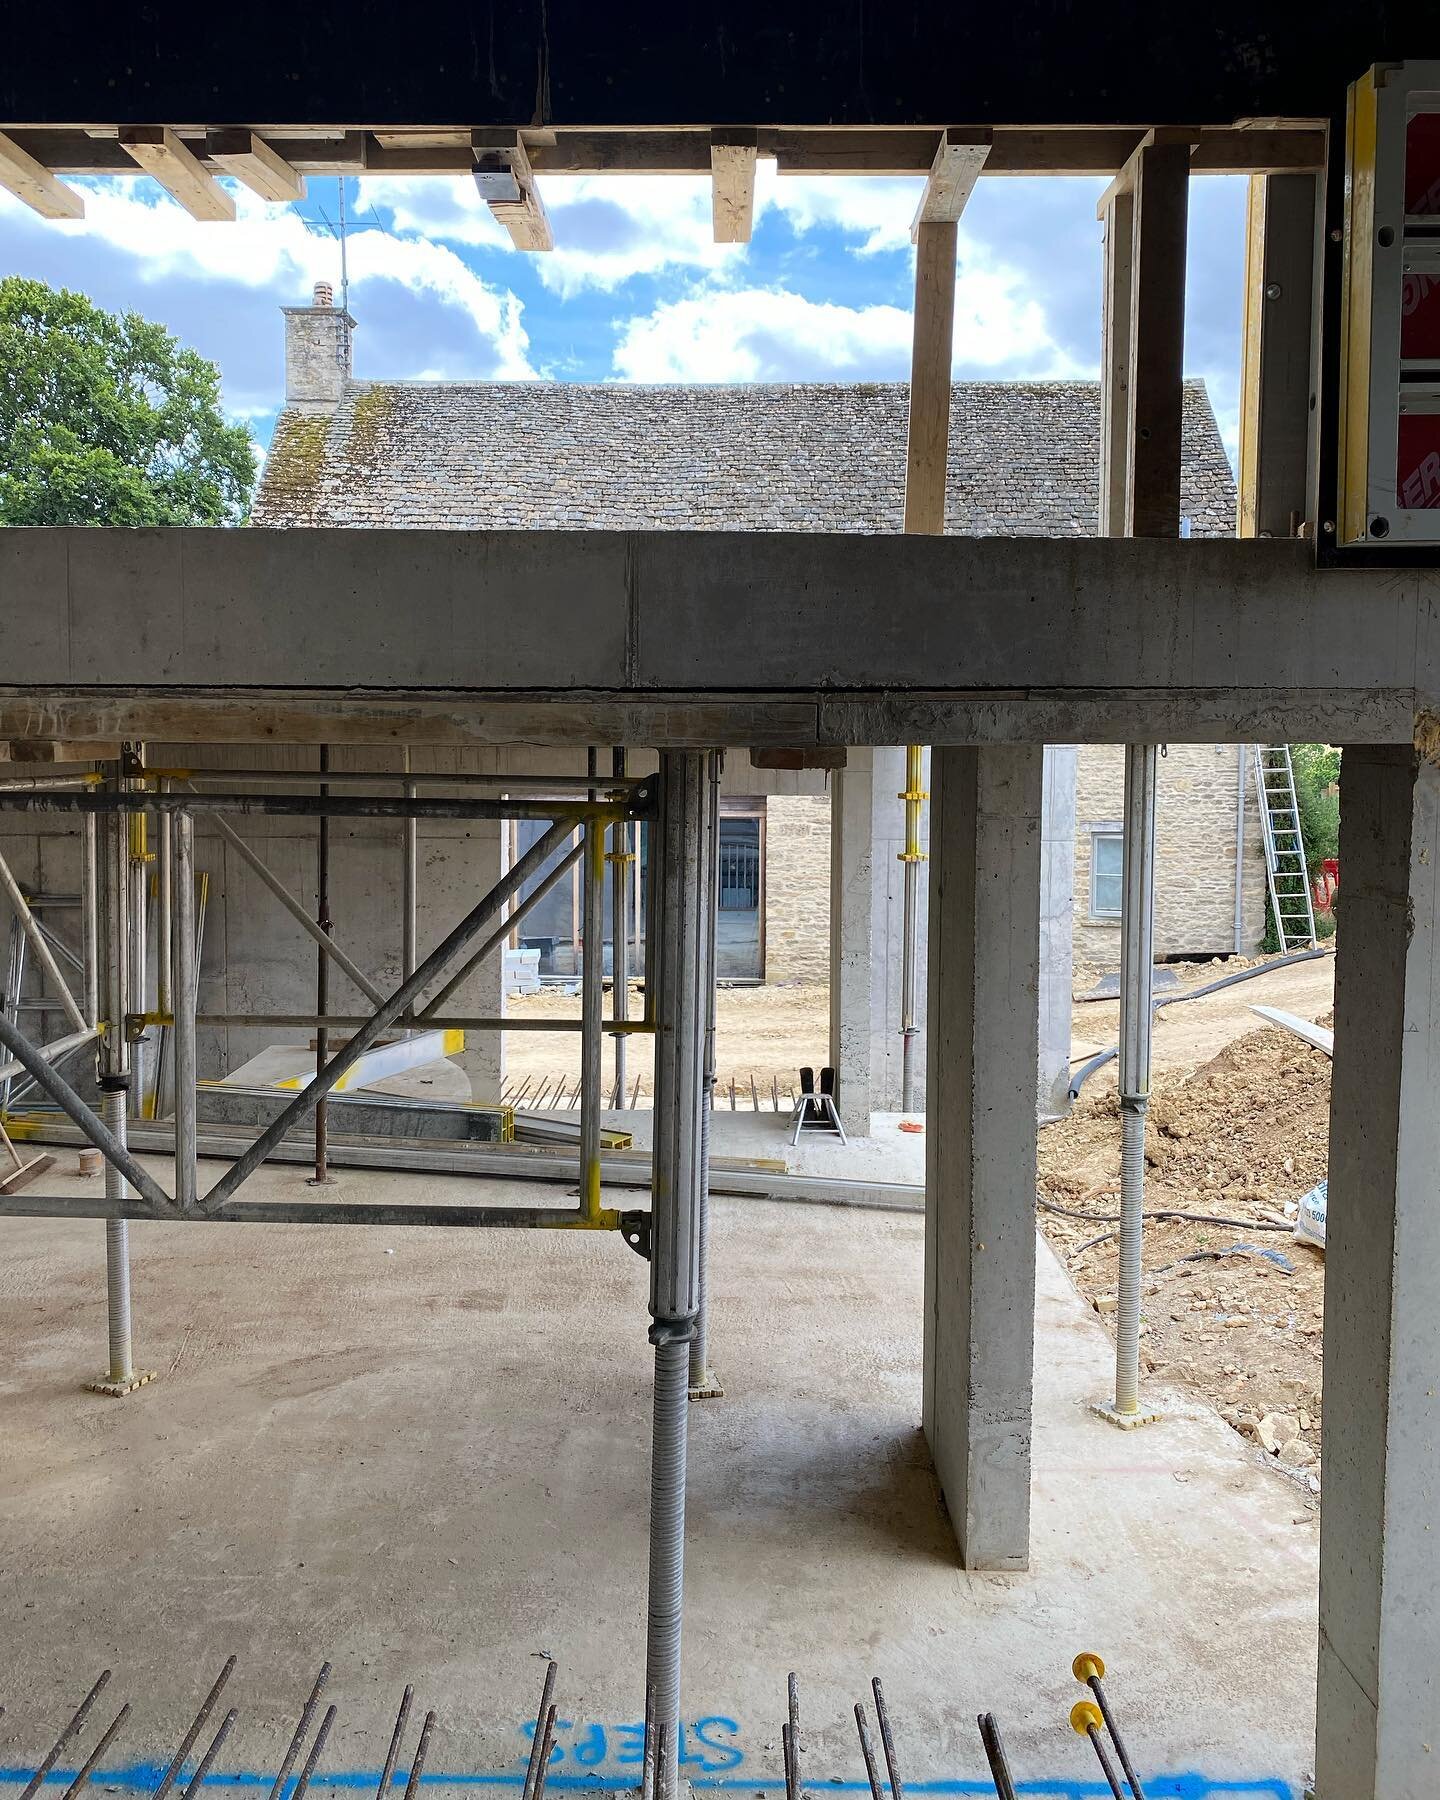 New views being created on one of our projects in the #cotswolds looking from the new contemporary wing, you will get glimpses of the existing stone threshing barn. The juxtaposition between new an old is key with this one.